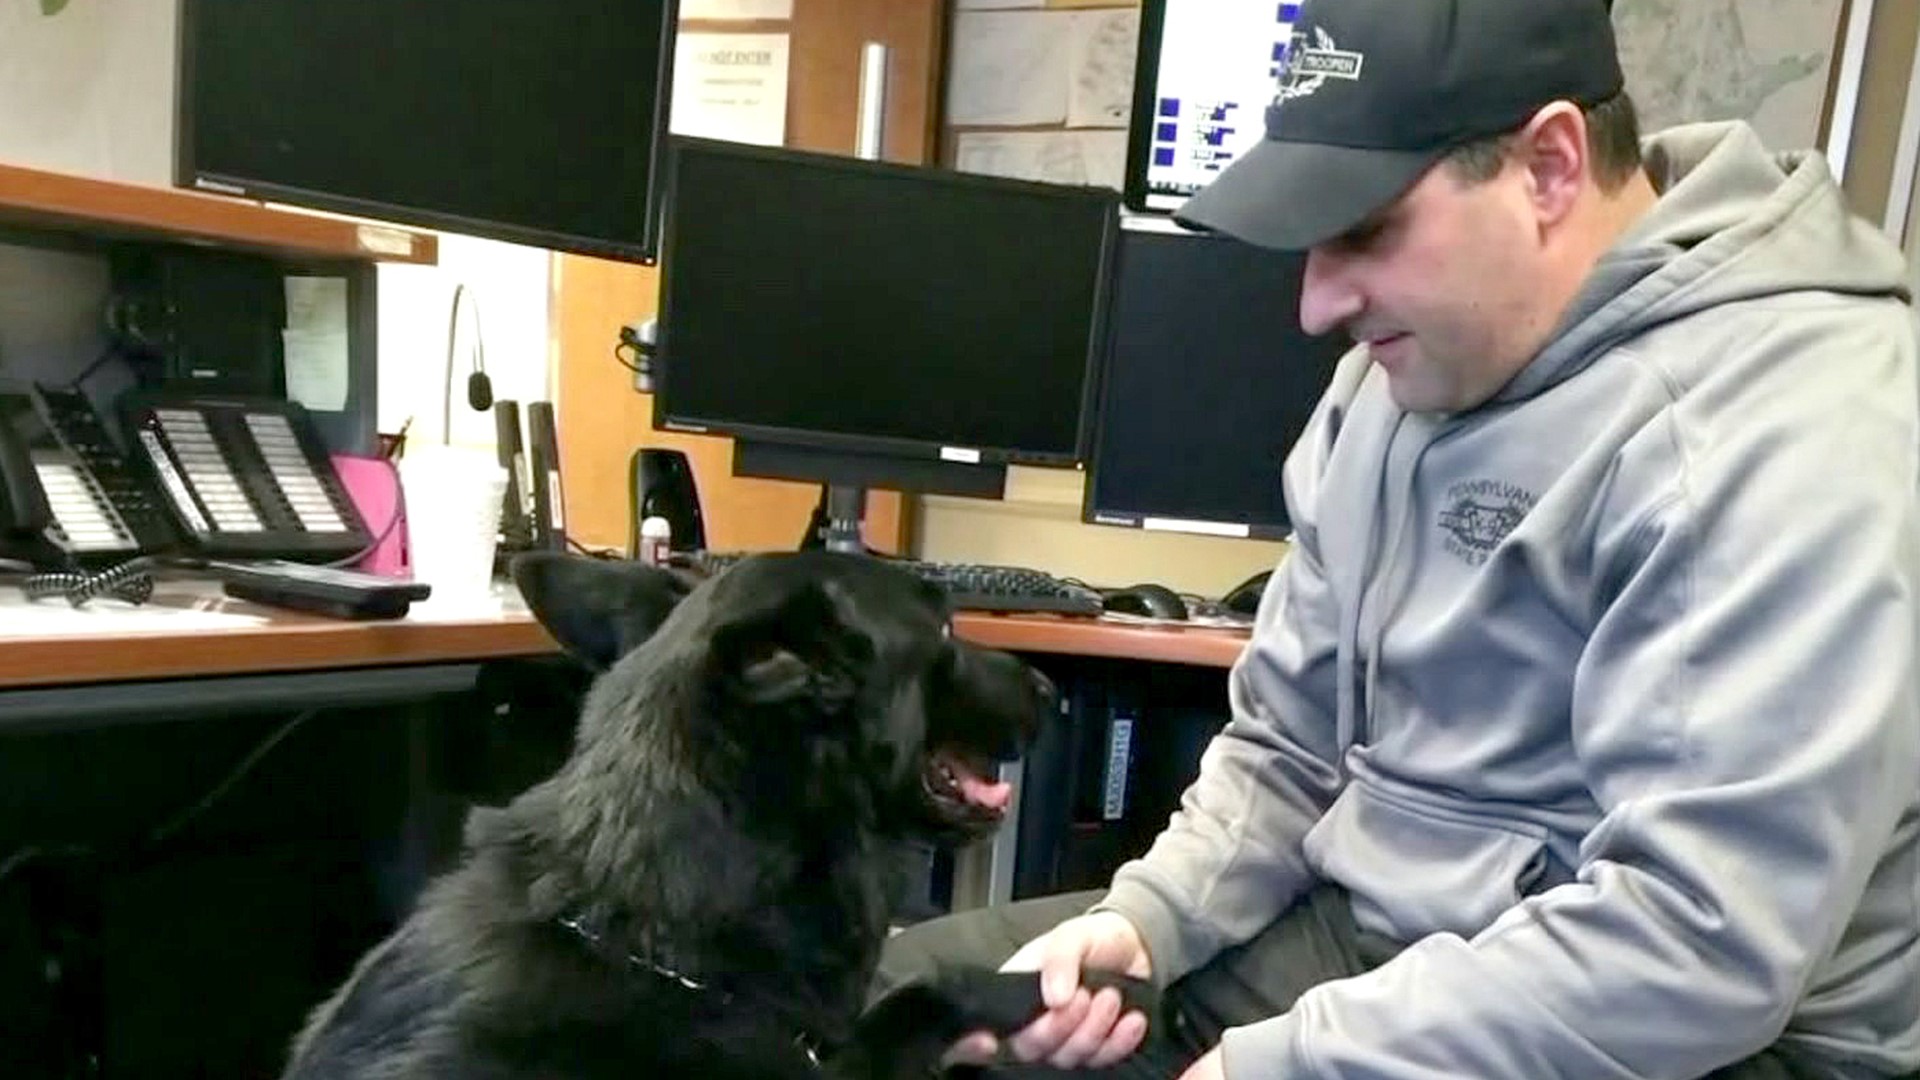 Micho was an 8-year-old German shepherd that helped get more than $15 million worth of drugs off the streets during his time with state police.